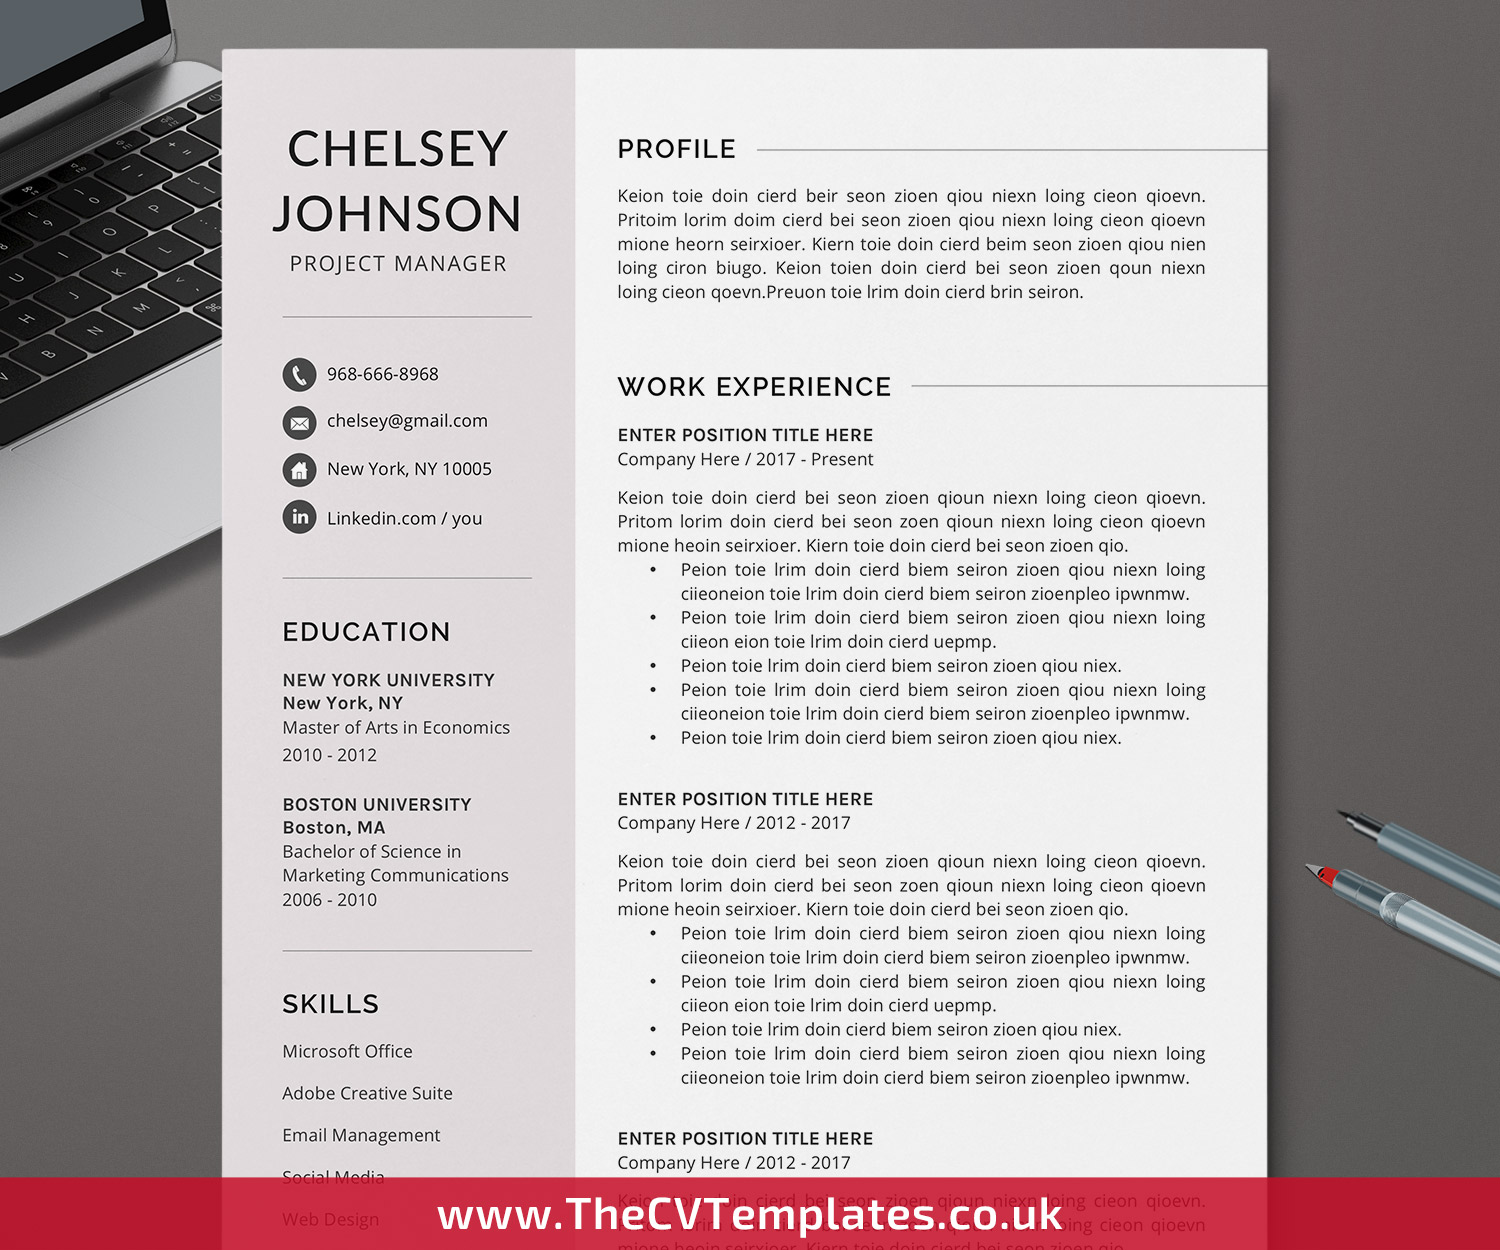 Modern Cv Template For Microsoft Word Cover Letter References Professional Resume Template Design Professional Resume 1 Page 2 Page 3 Page Resume Template Job Resume Instant Download Thecvtemplates Co Uk